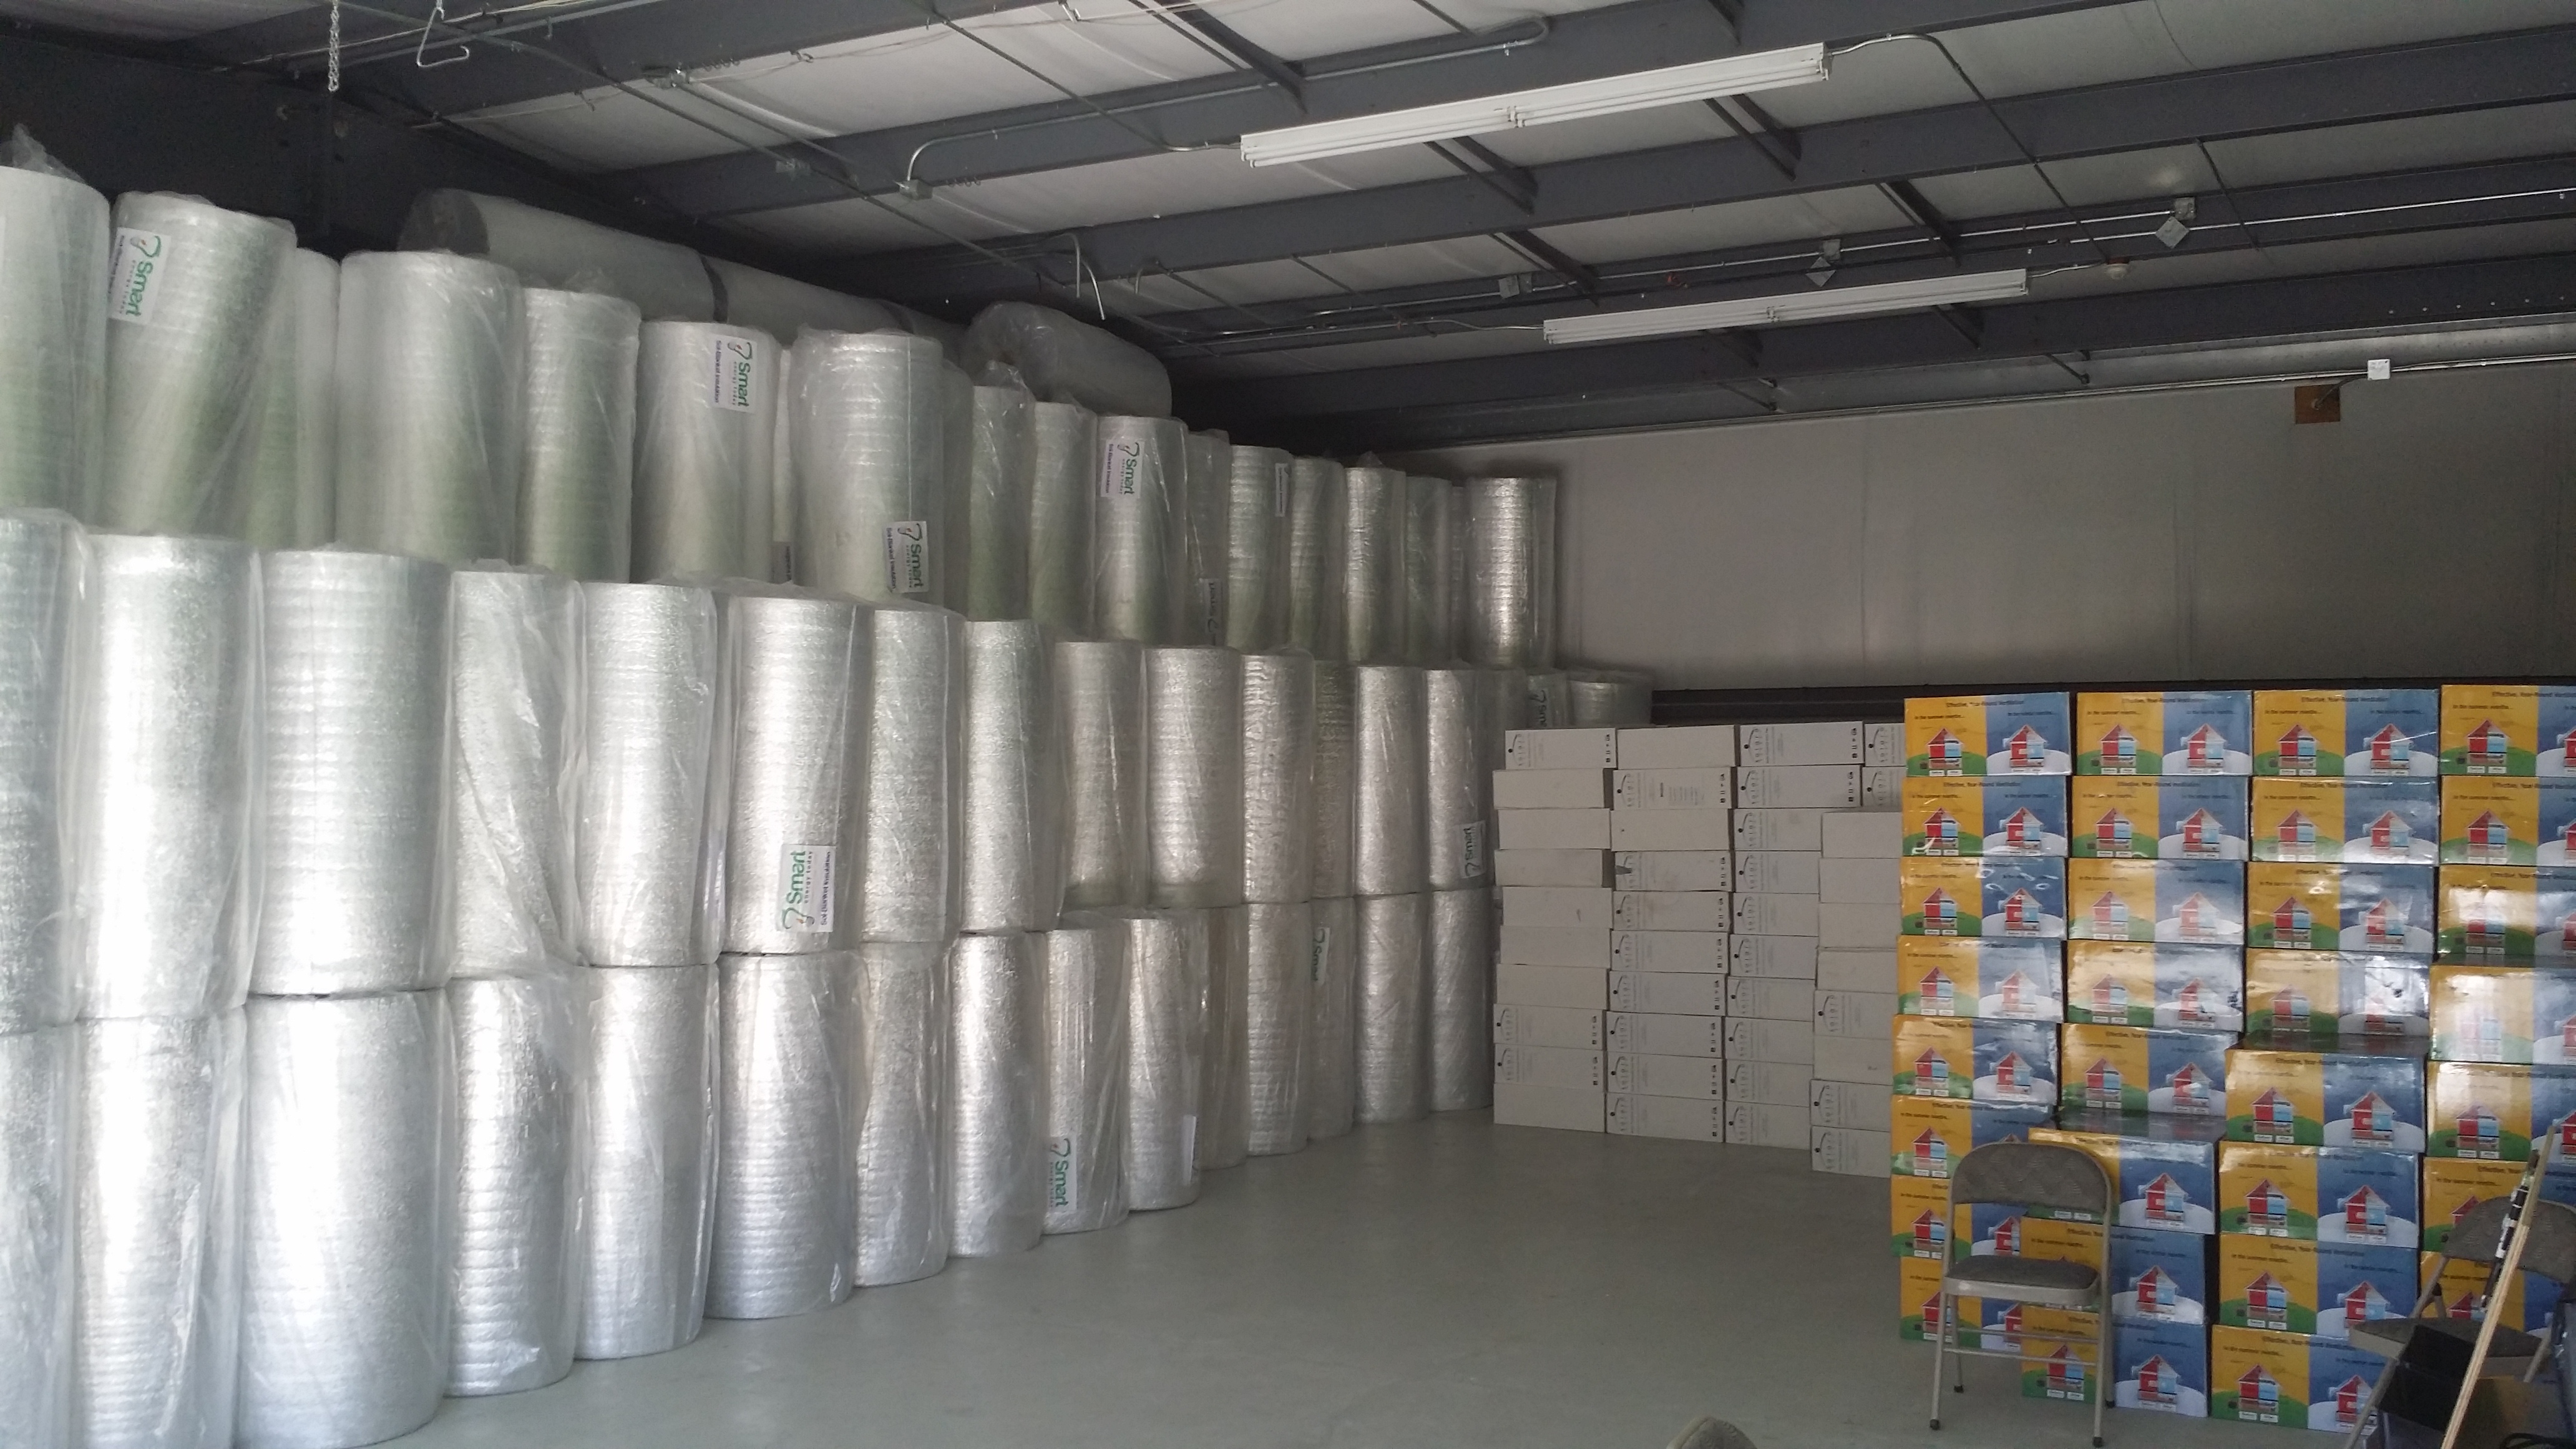 Warehouse holds 2 Million square Feet of Sol-Blanket Insulation